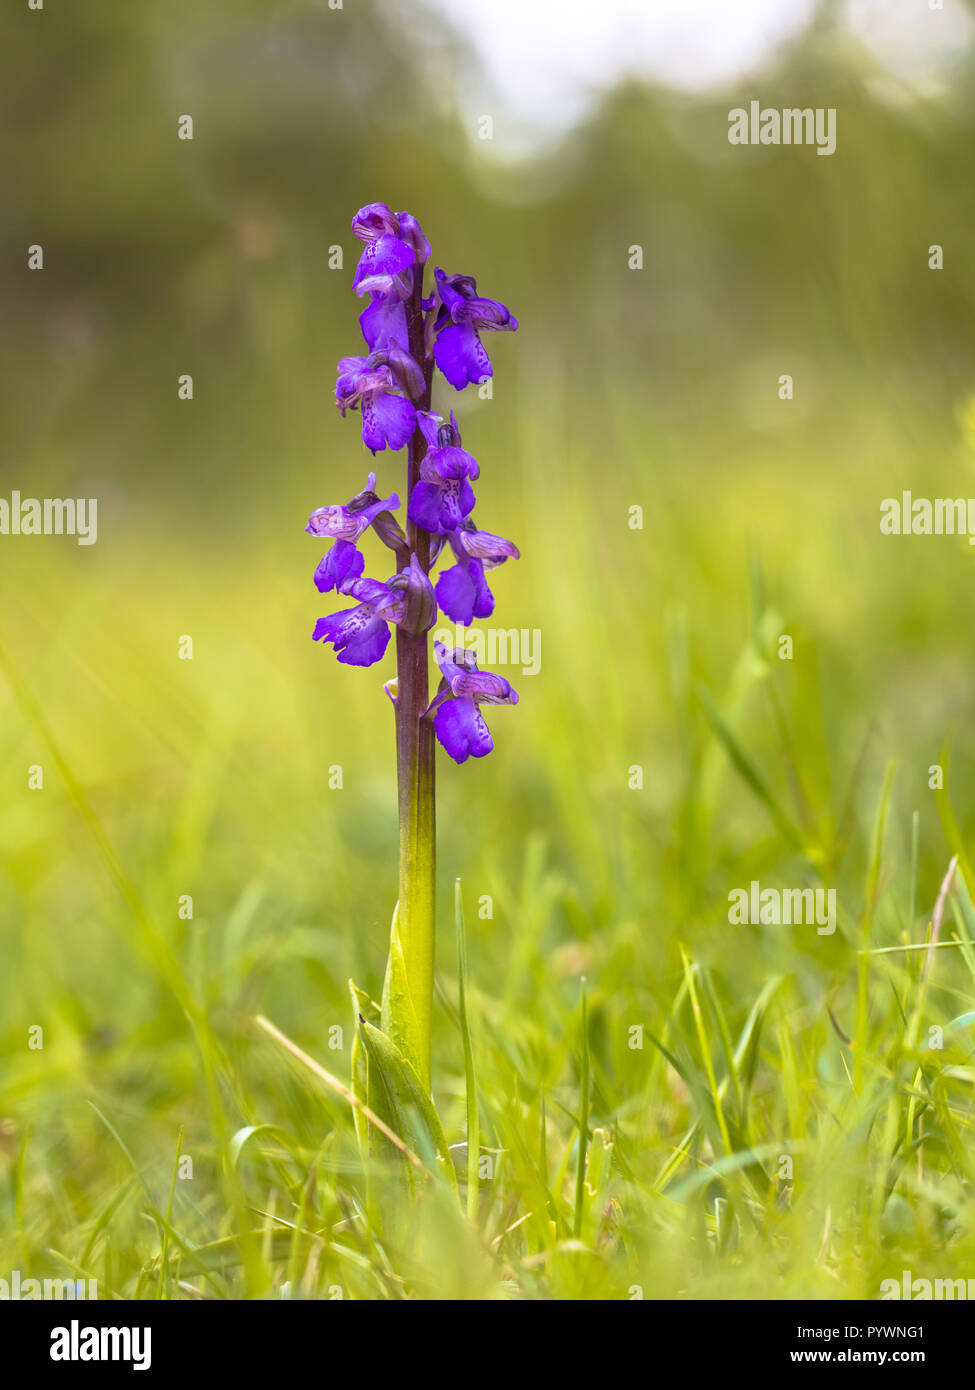 Green-winged Orchid (Anacamptis morio) in a calcareous grassland of a nature reserve in the Eifel, Germany Stock Photo